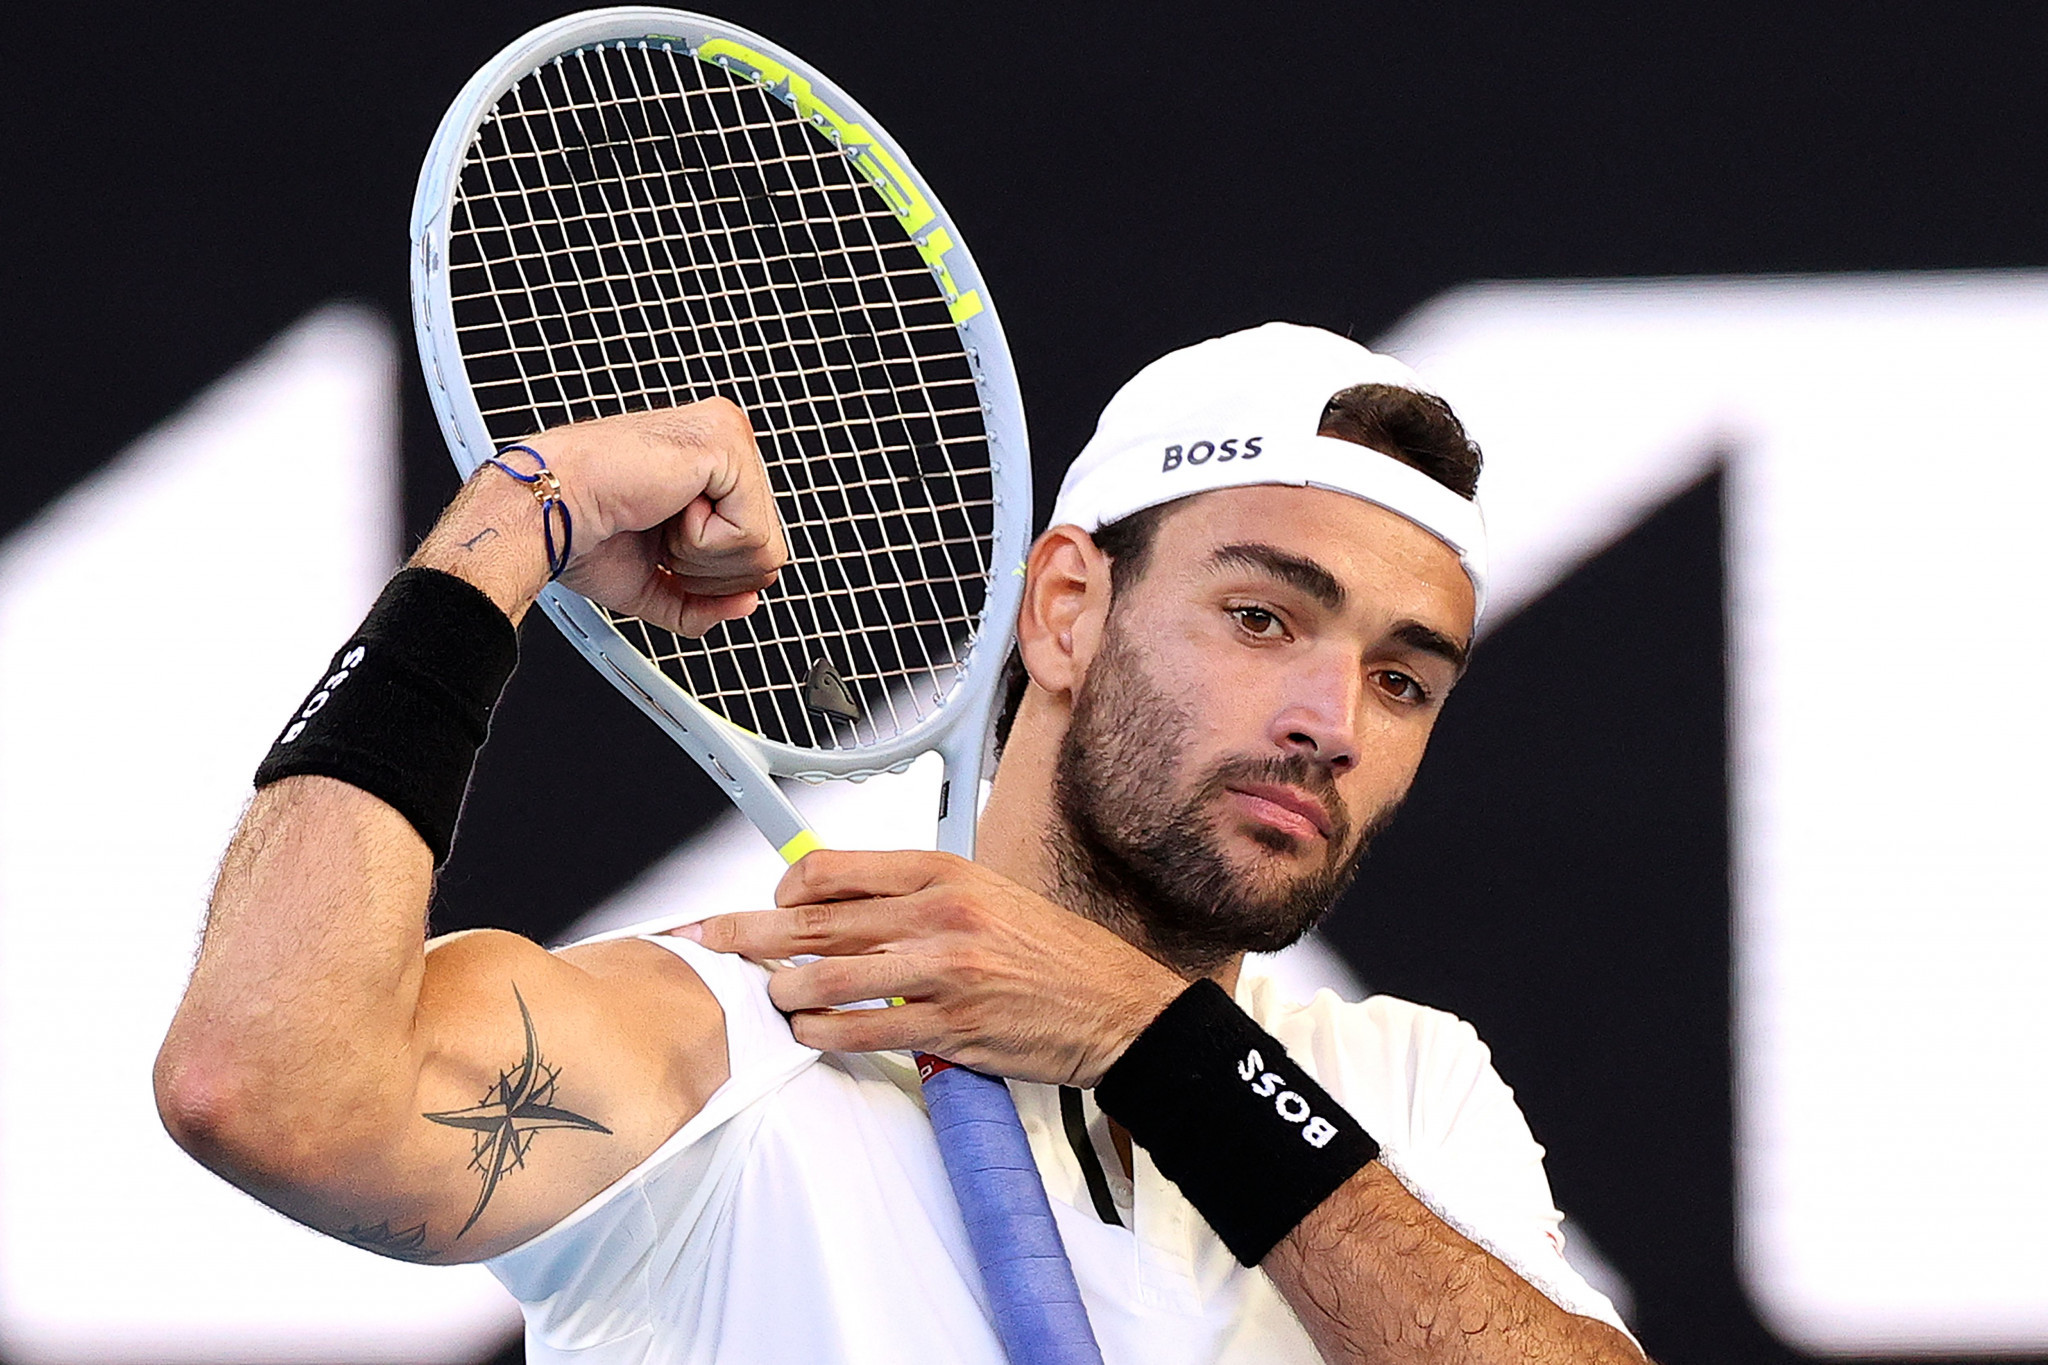 Italy’s Matteo Berrettini beat rising star Carlos Alcaraz of Spain in a five-set match ©Getty Images